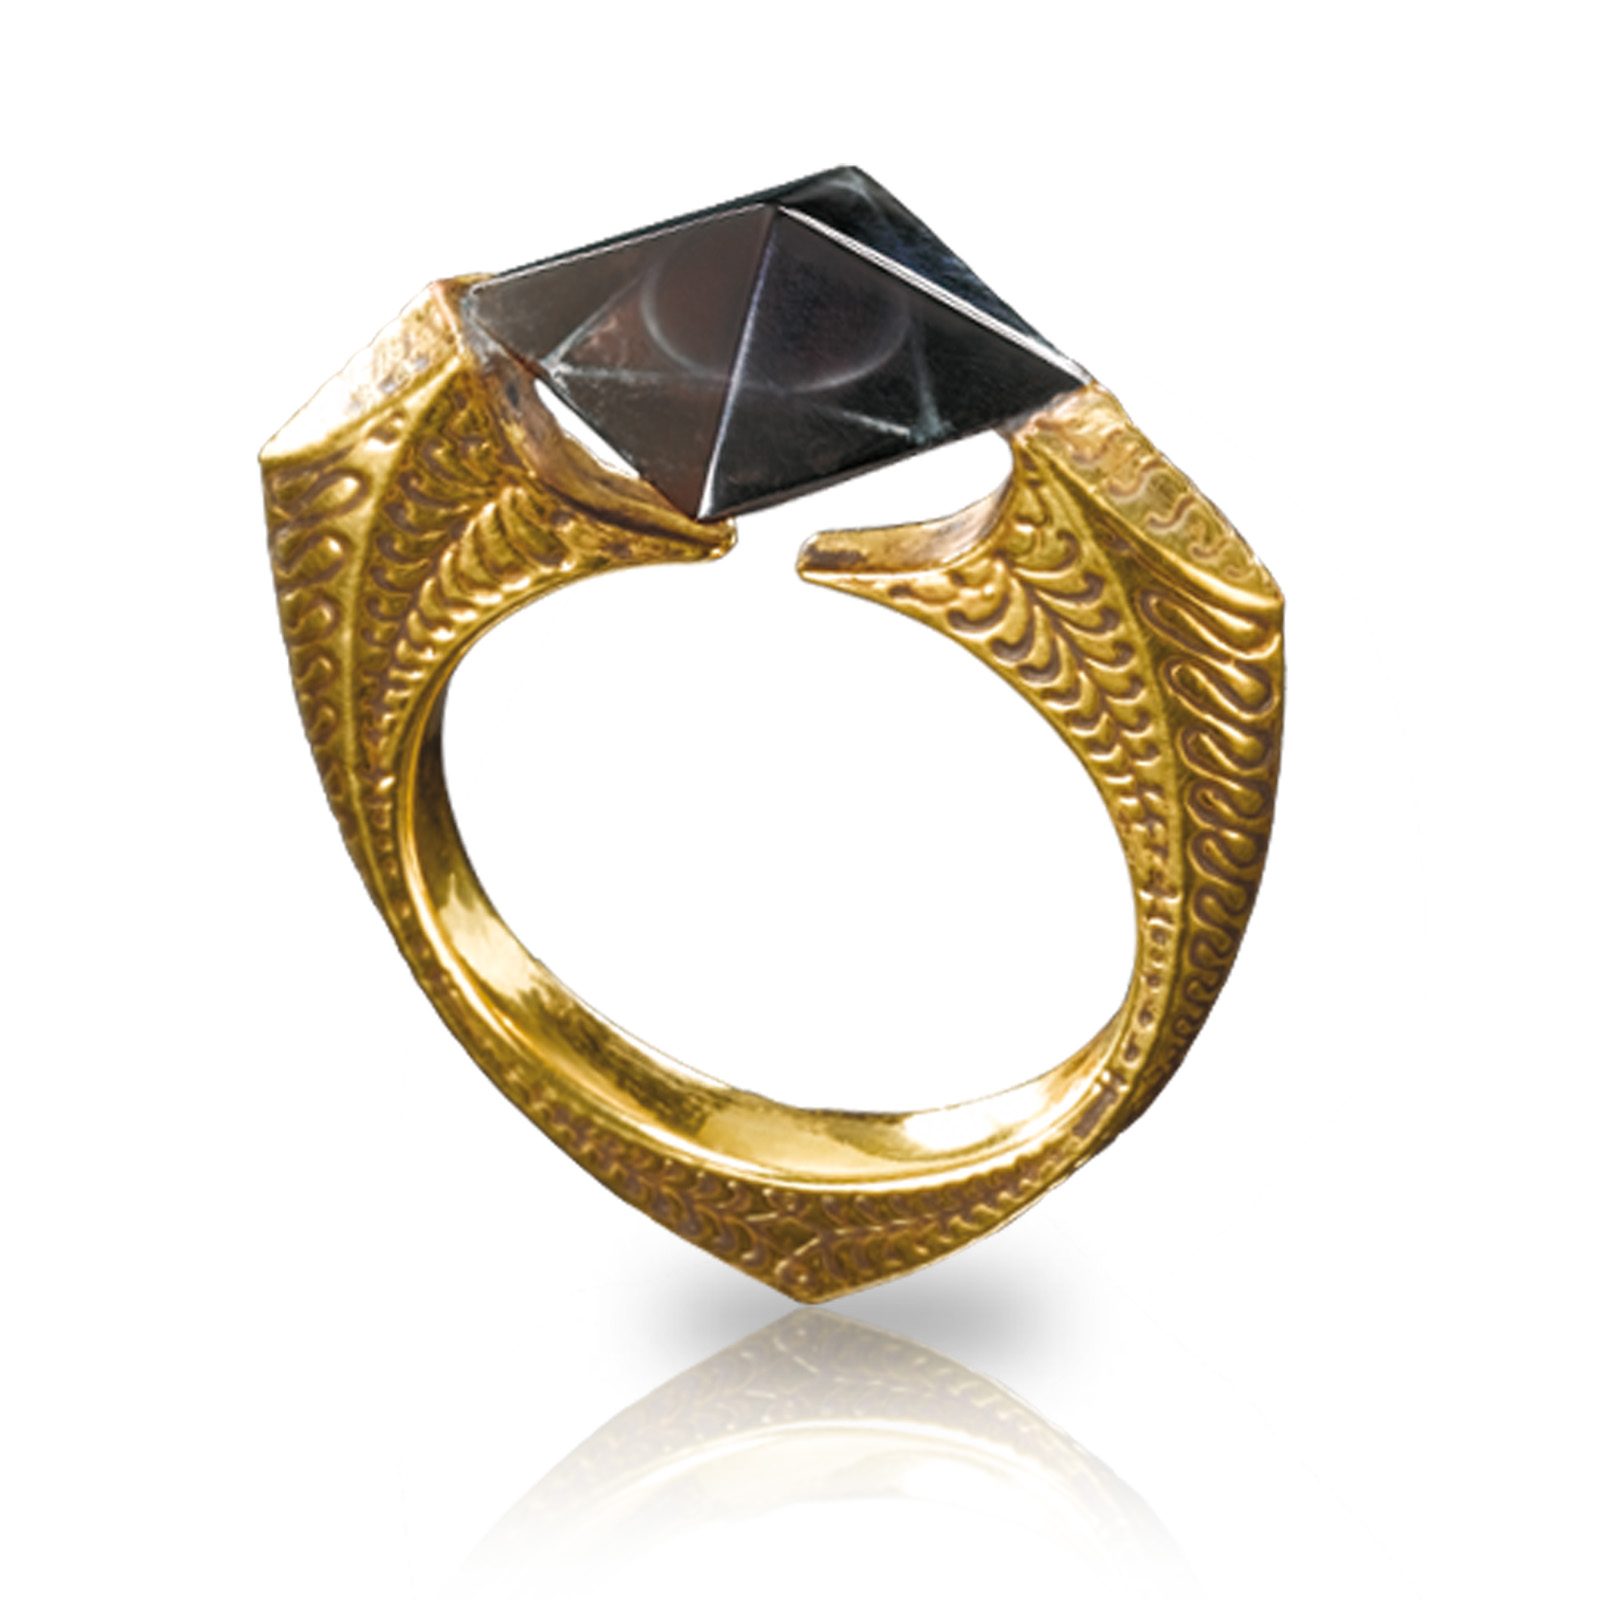 Harry Potter - The Horcrux Ring